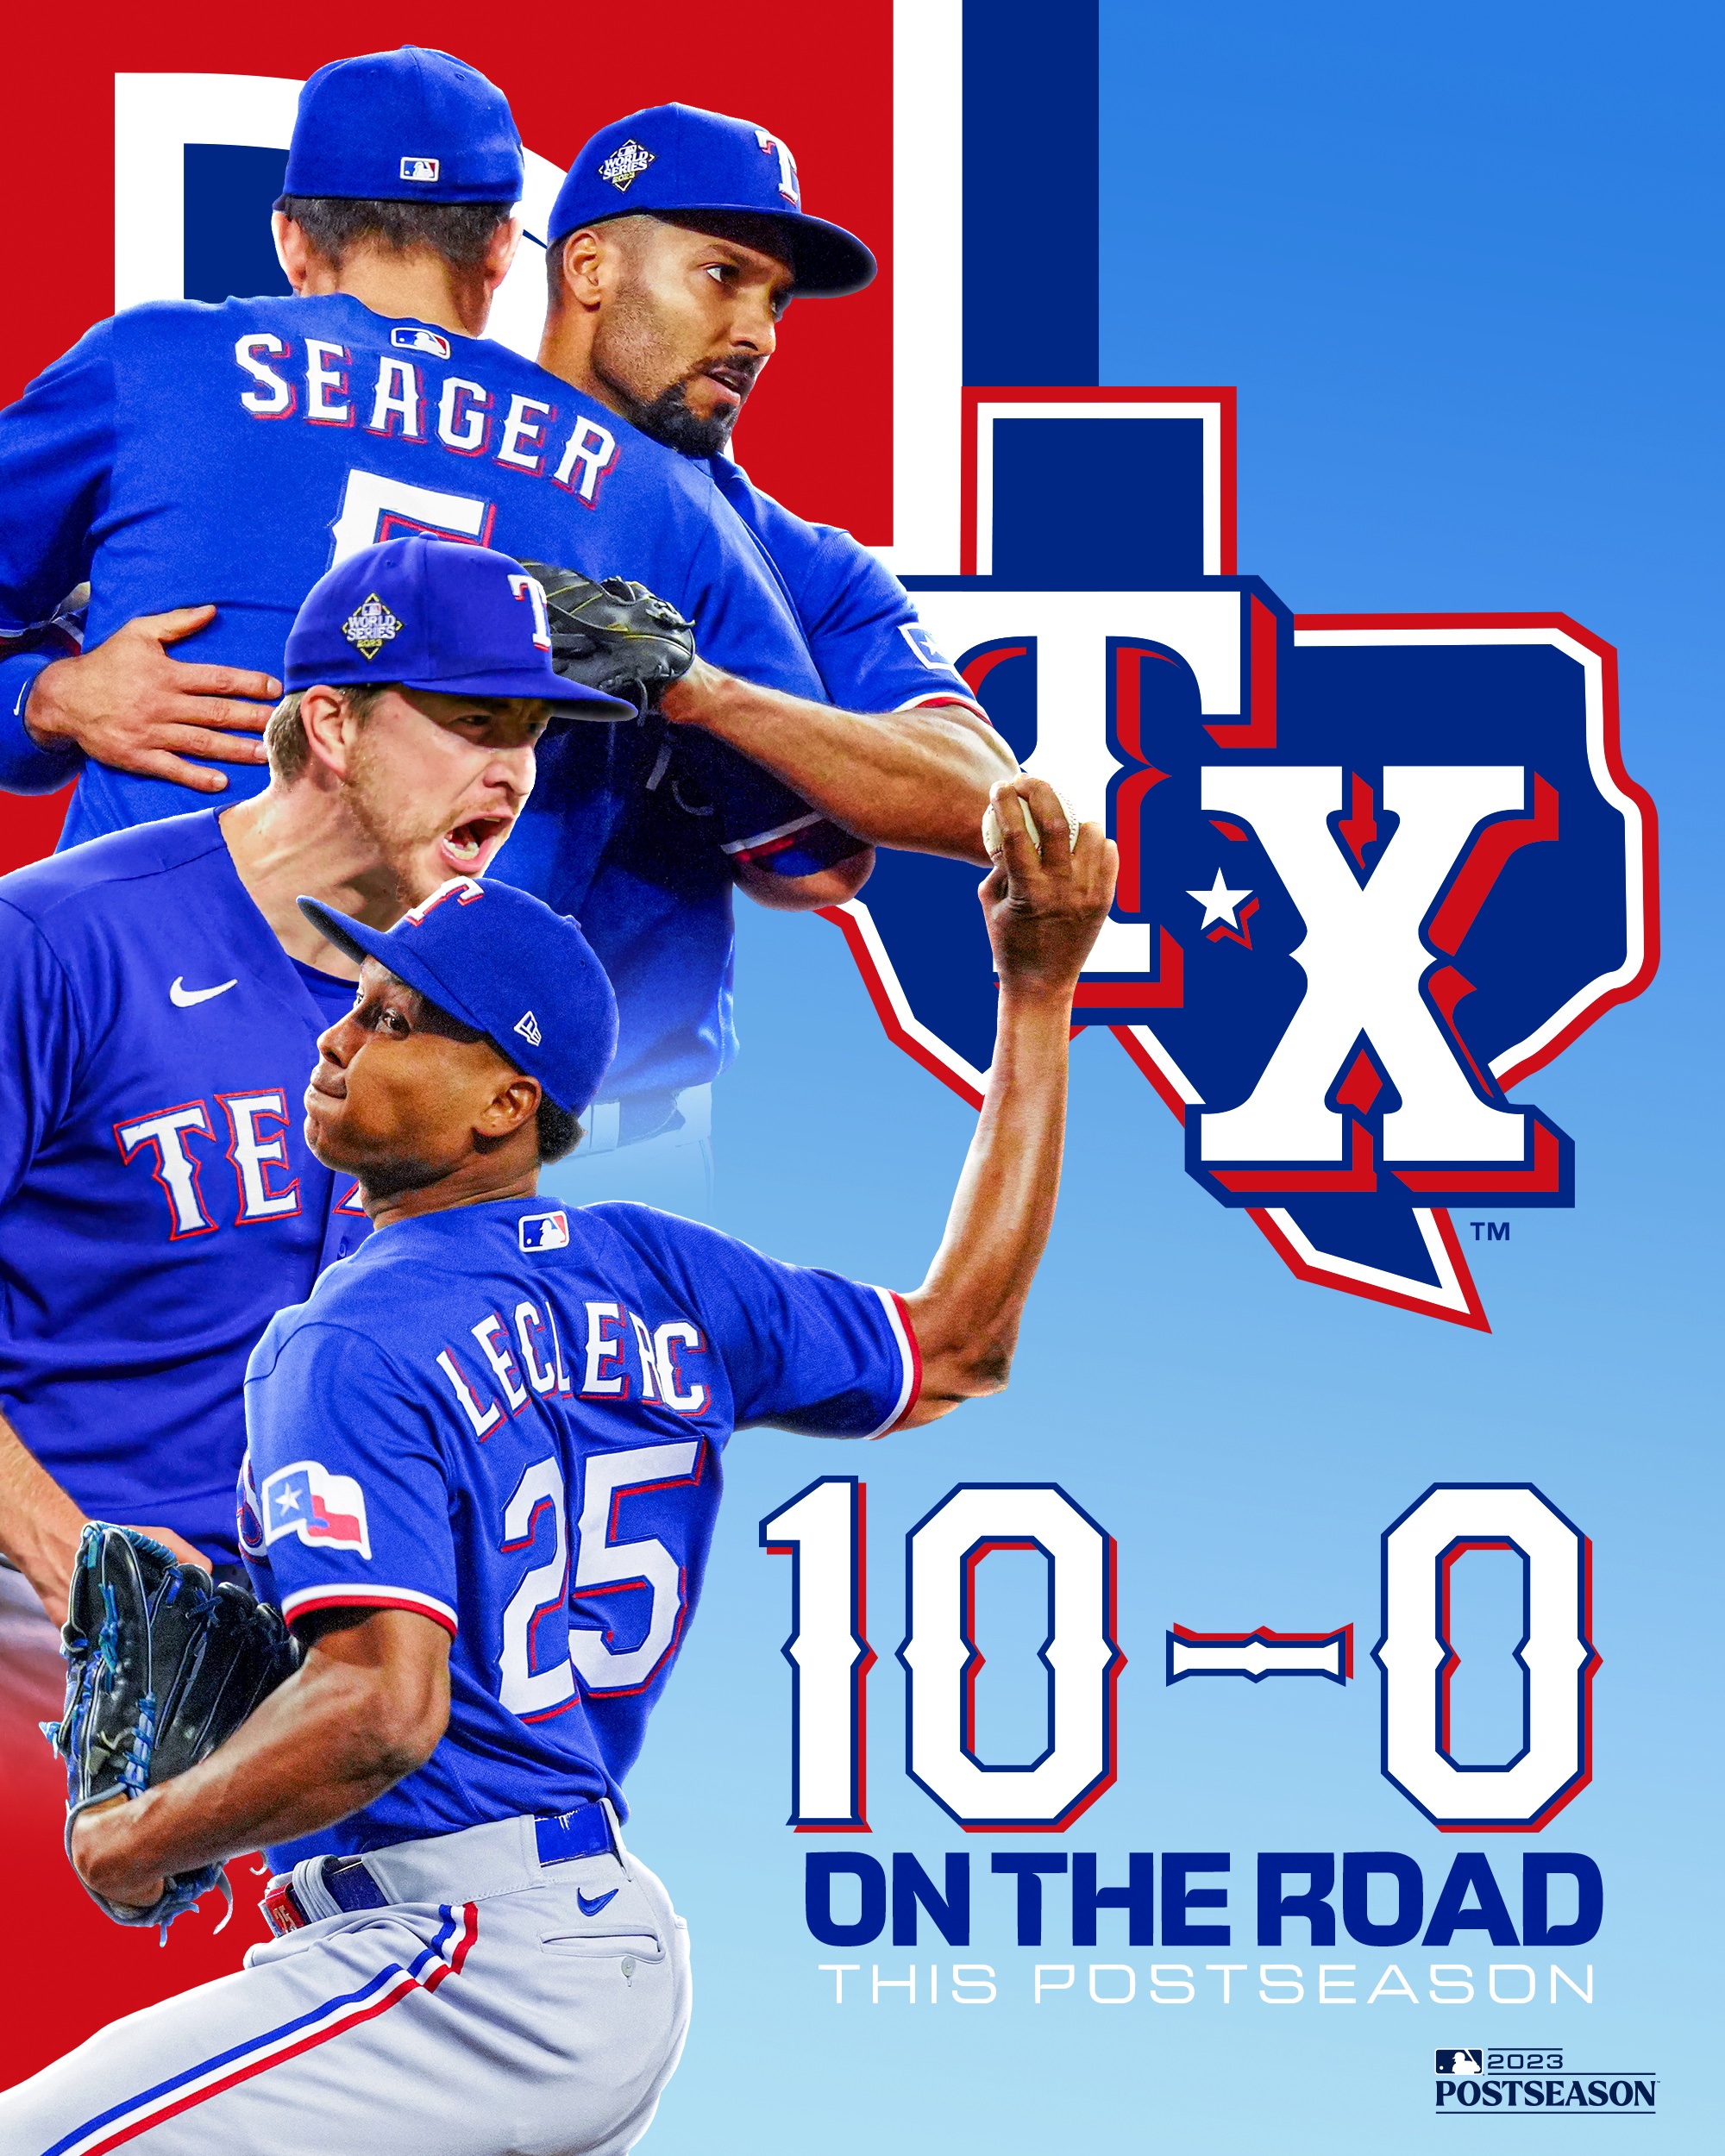 Texas Rangers
10-0 on the Road This Postseason
Pictured: Corey Seager and Marcus Semien hug, Josh Sborz yells, and José Leclerc pitches in blue Texas Rangers uniforms.
2023 MLB Postseason 